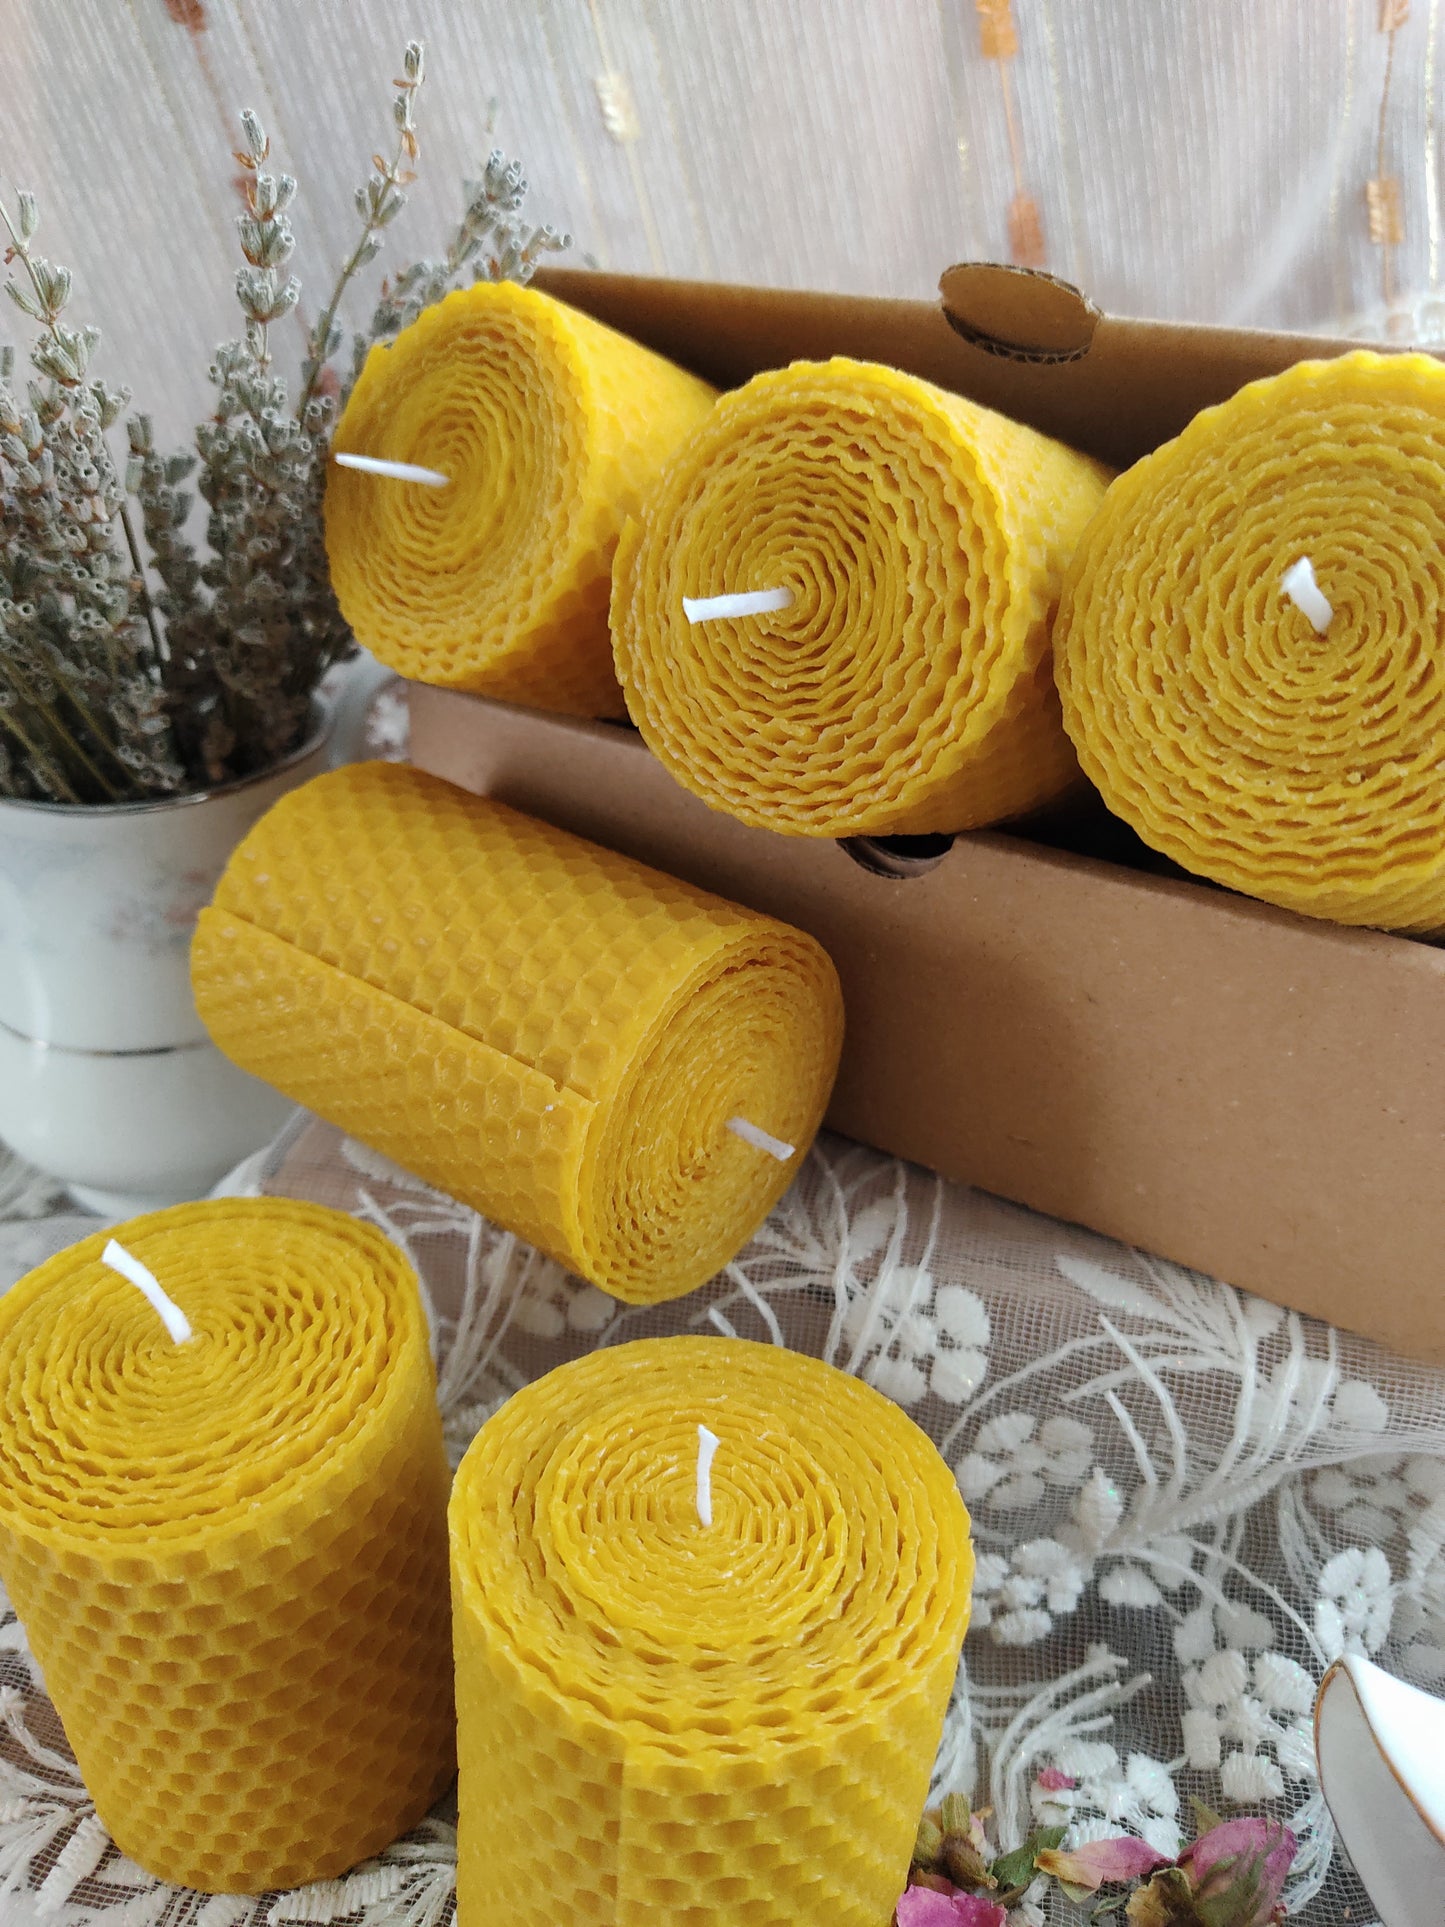 Wholesale Handmade Candles 7x6 cm Honeycomb Beeswax Candles,